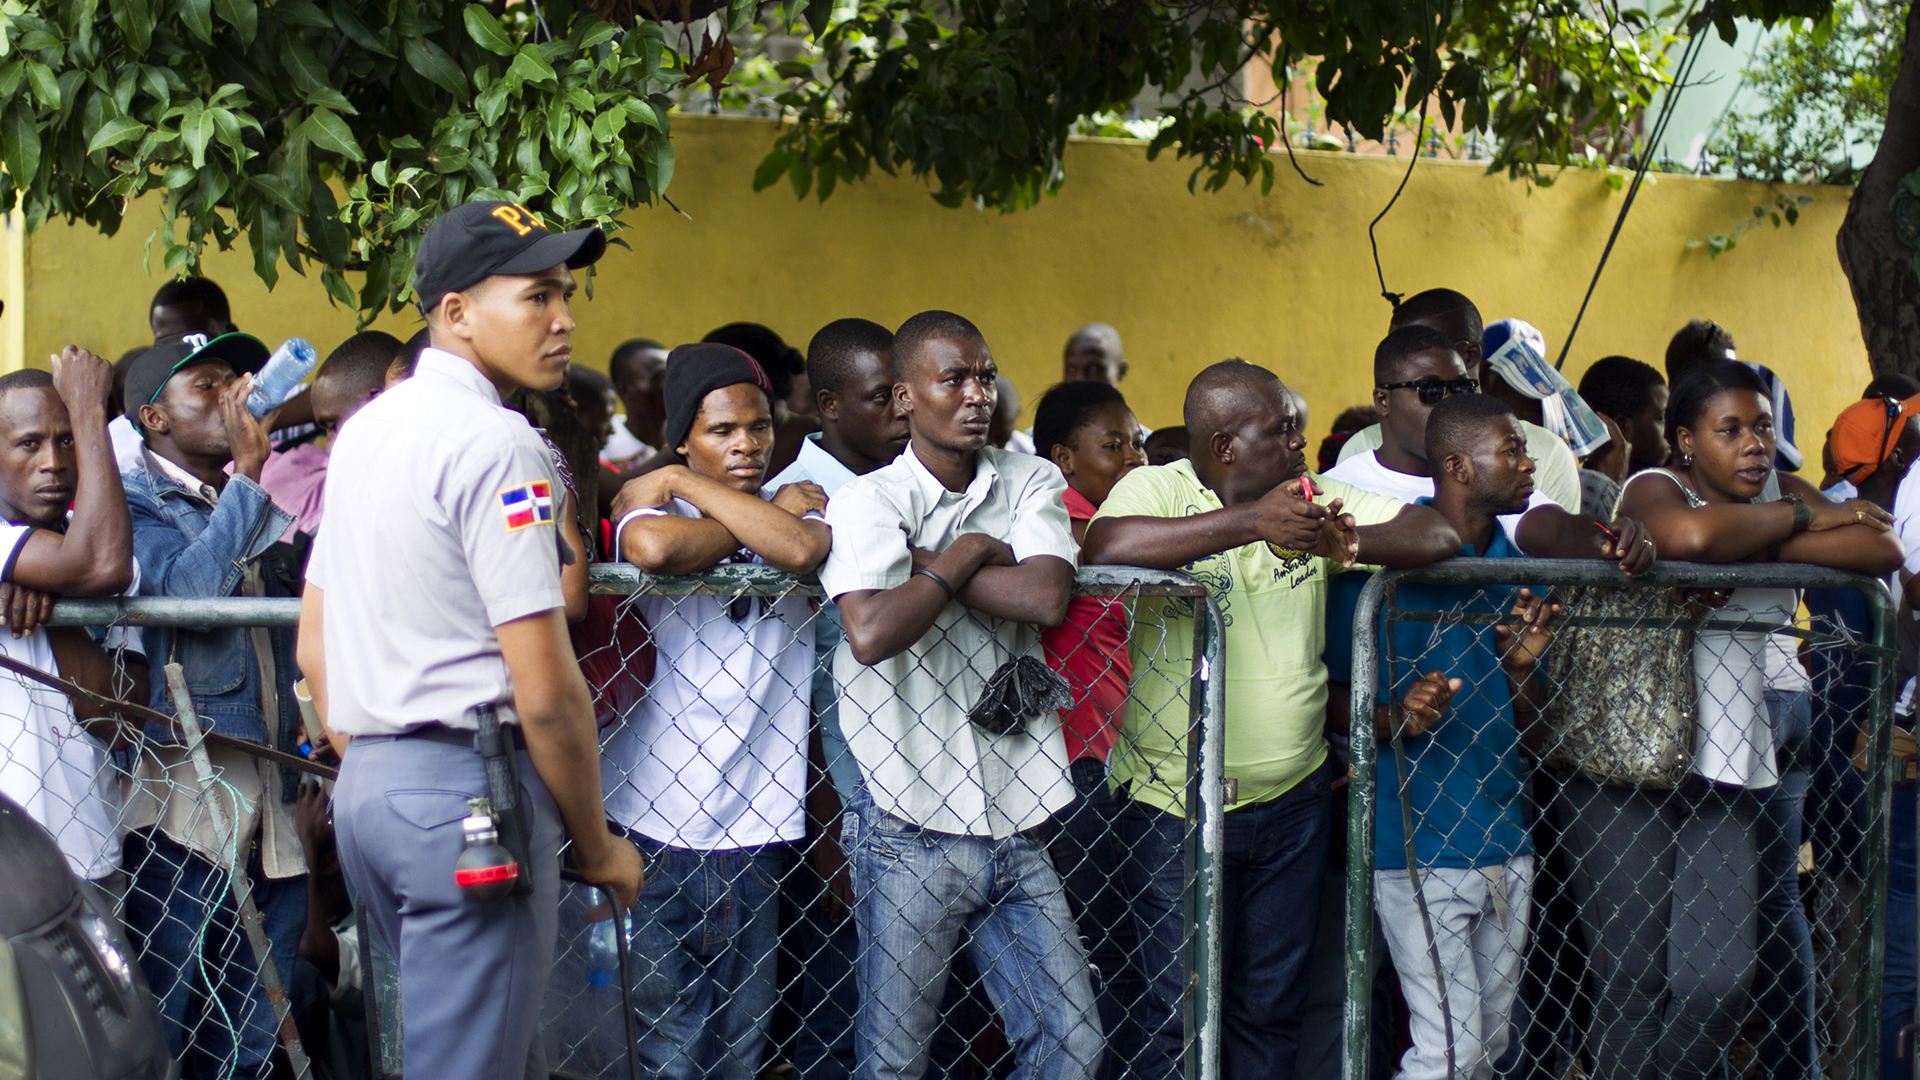 Thousands of Haitians facing deportation in Dominican Republic